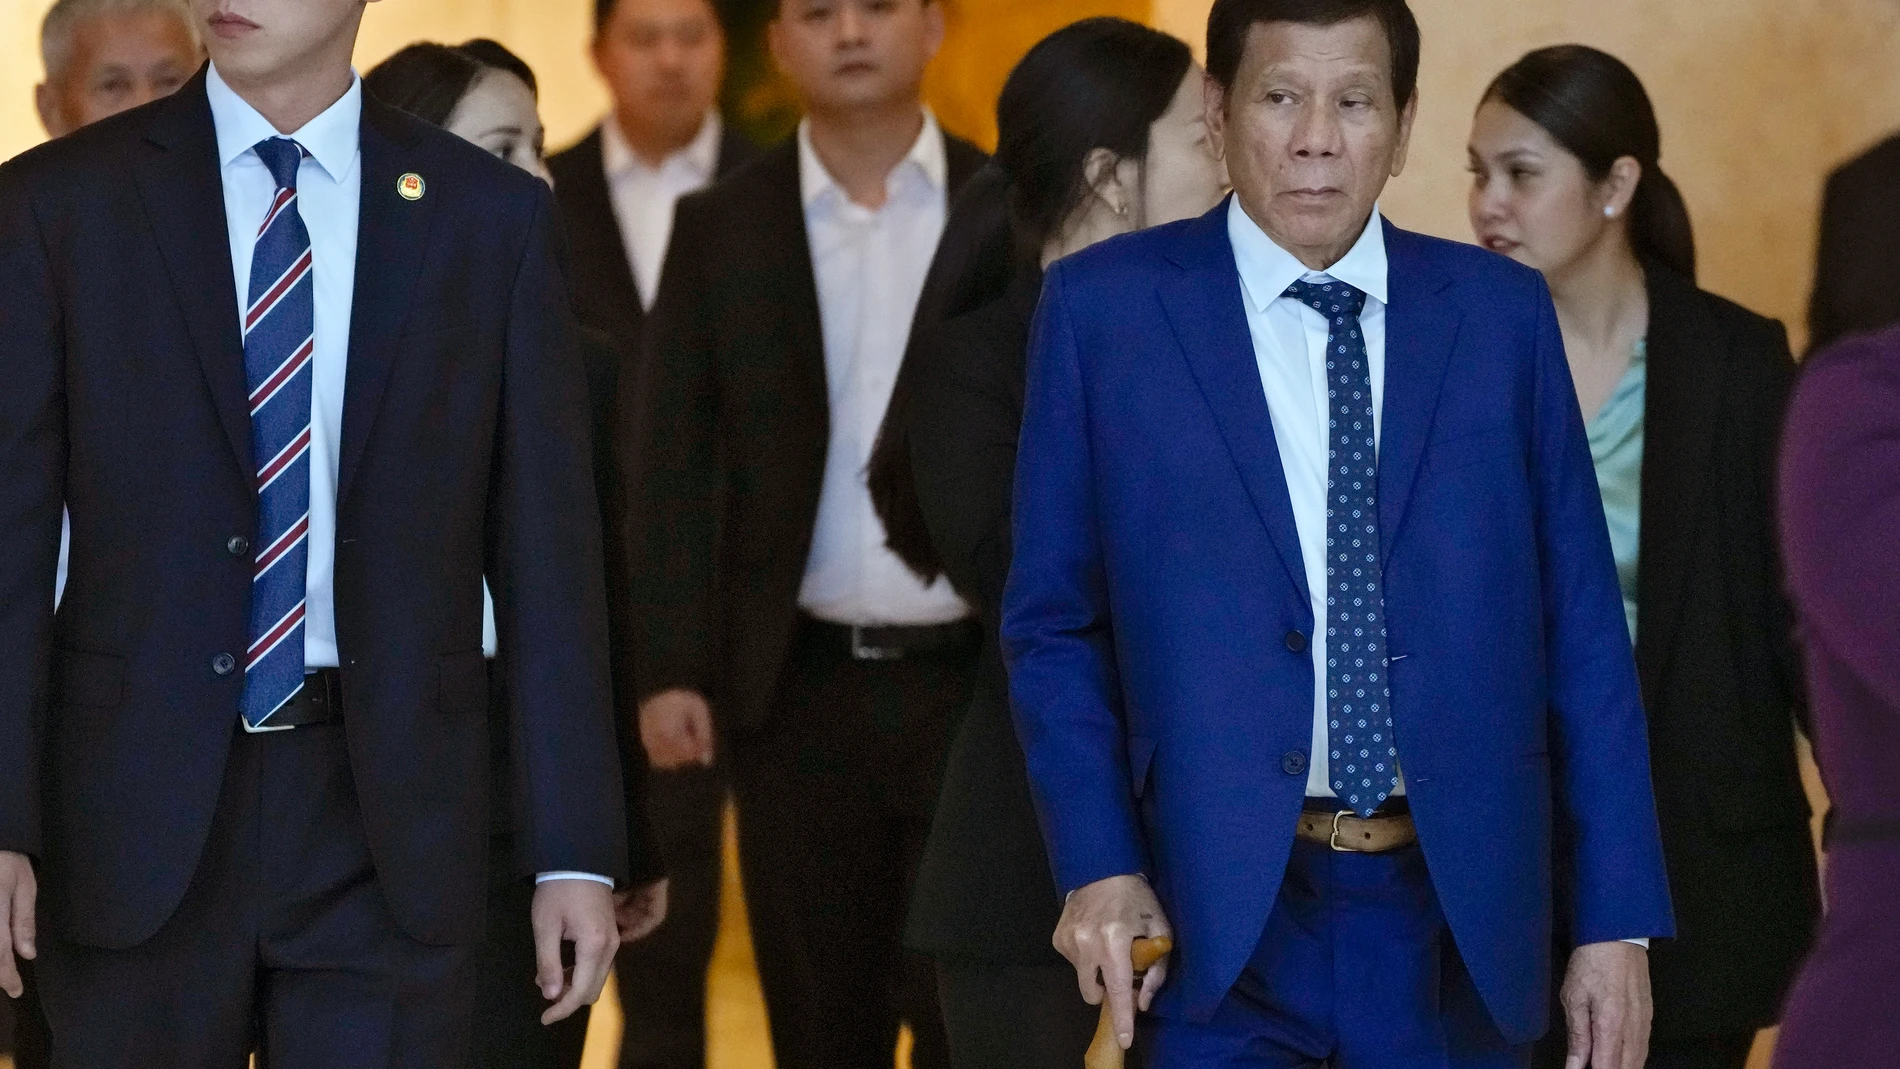 Philippine former President Rodrigo Duterte, right, is escorted by officials as he leaves a hotel in Beijing, Monday, July 17, 2023. Duterte met with Chinese President Xi Jinping, according to CCTV reports. (AP Photo/Andy Wong)